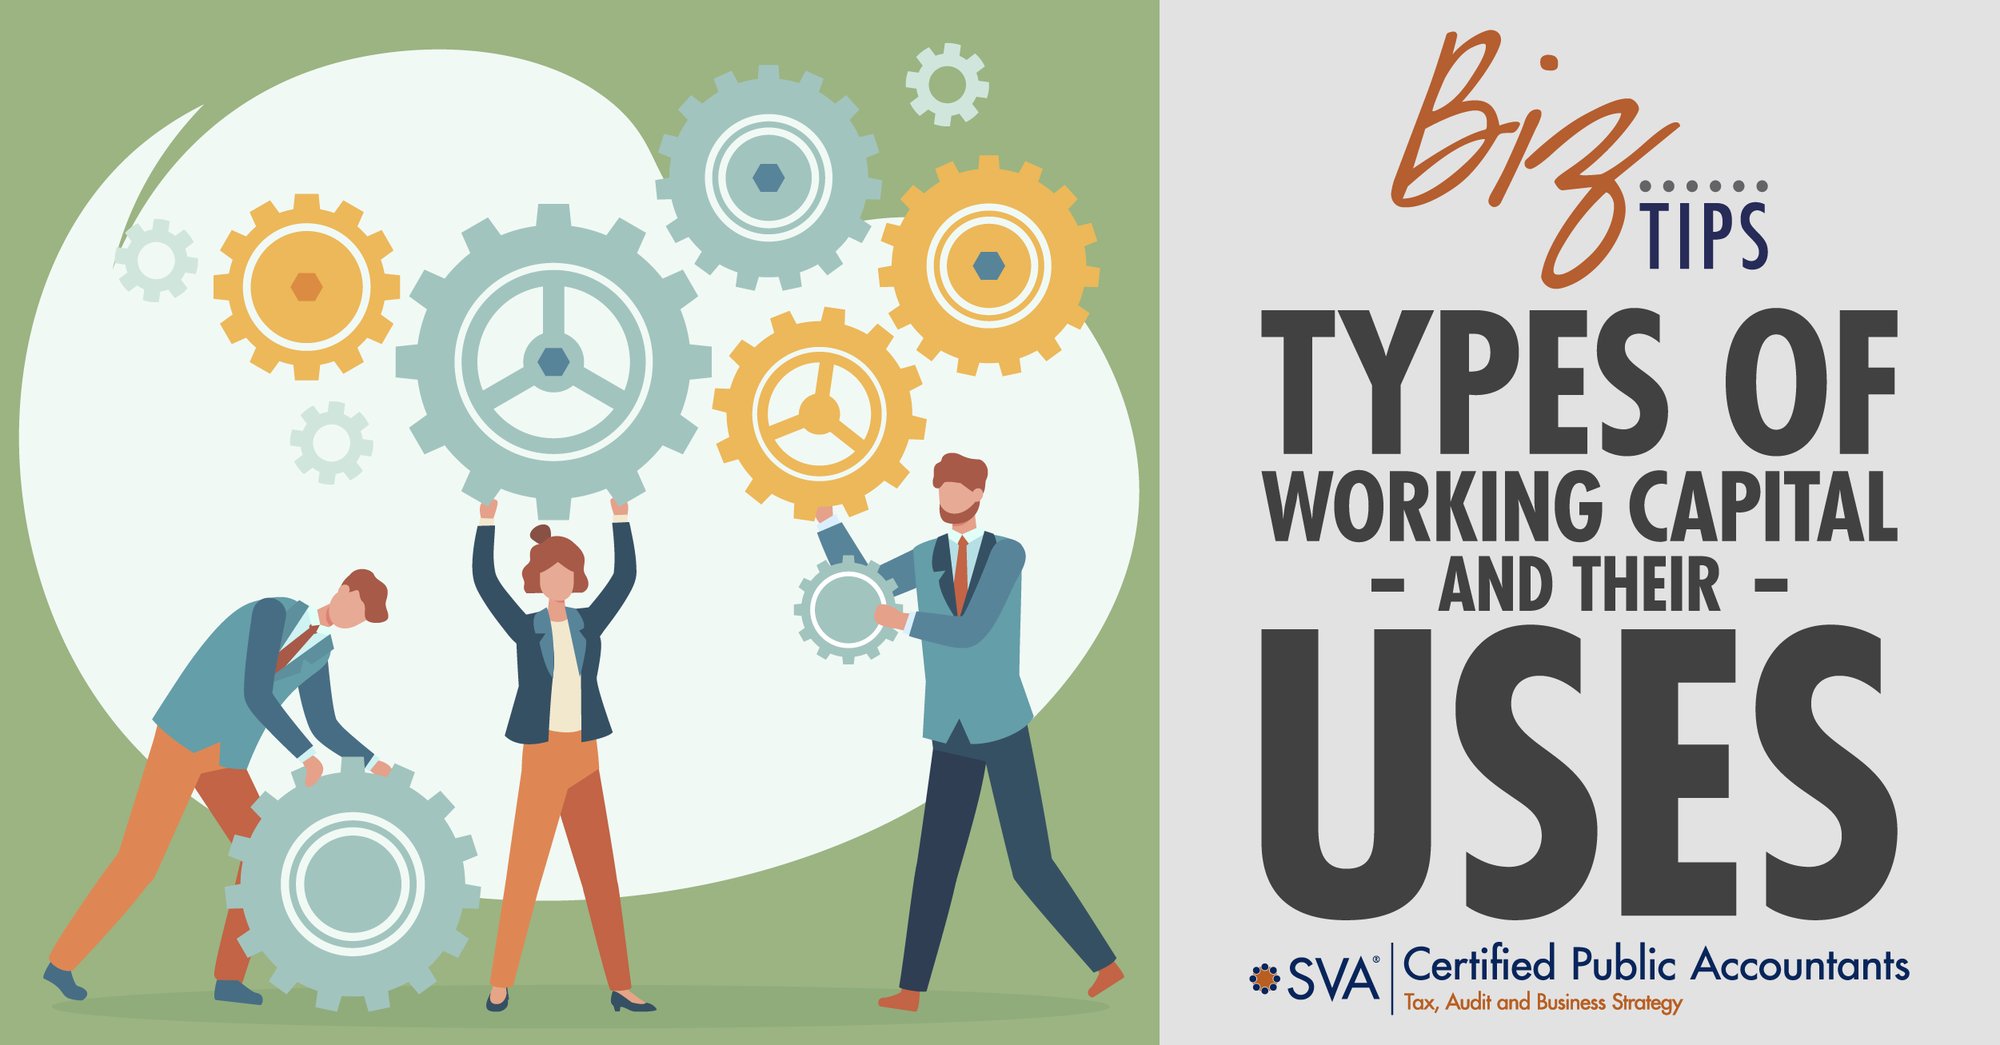 sva-certified-public-accountants-biz-tips-types-of-working-capital-and-their-uses